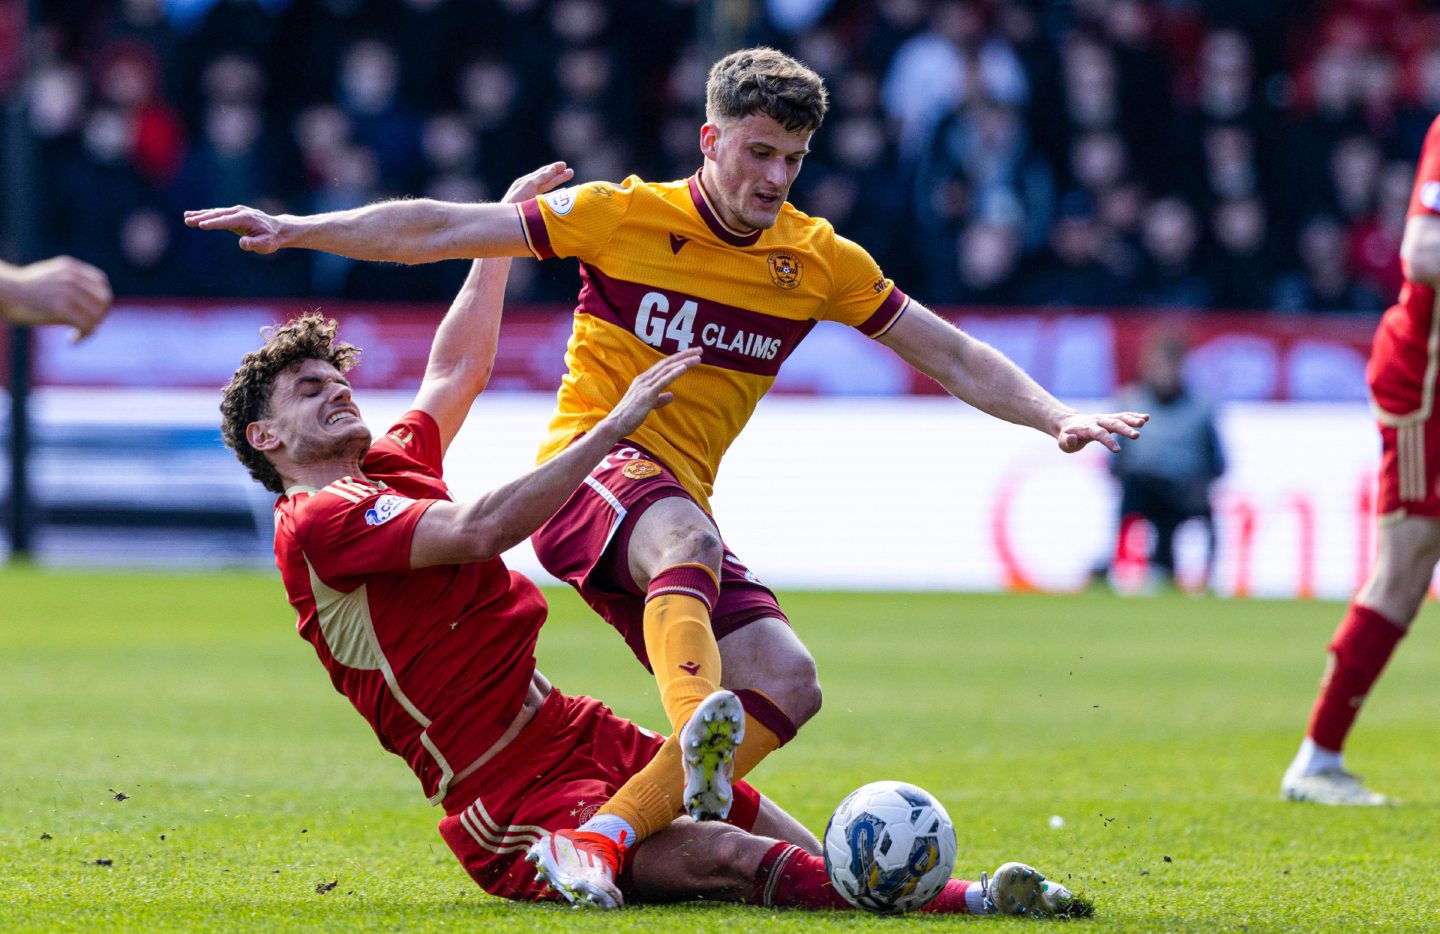  Motherwell's Jack Vale and Aberdeen's Dante Polvara in action. Image: SNS 